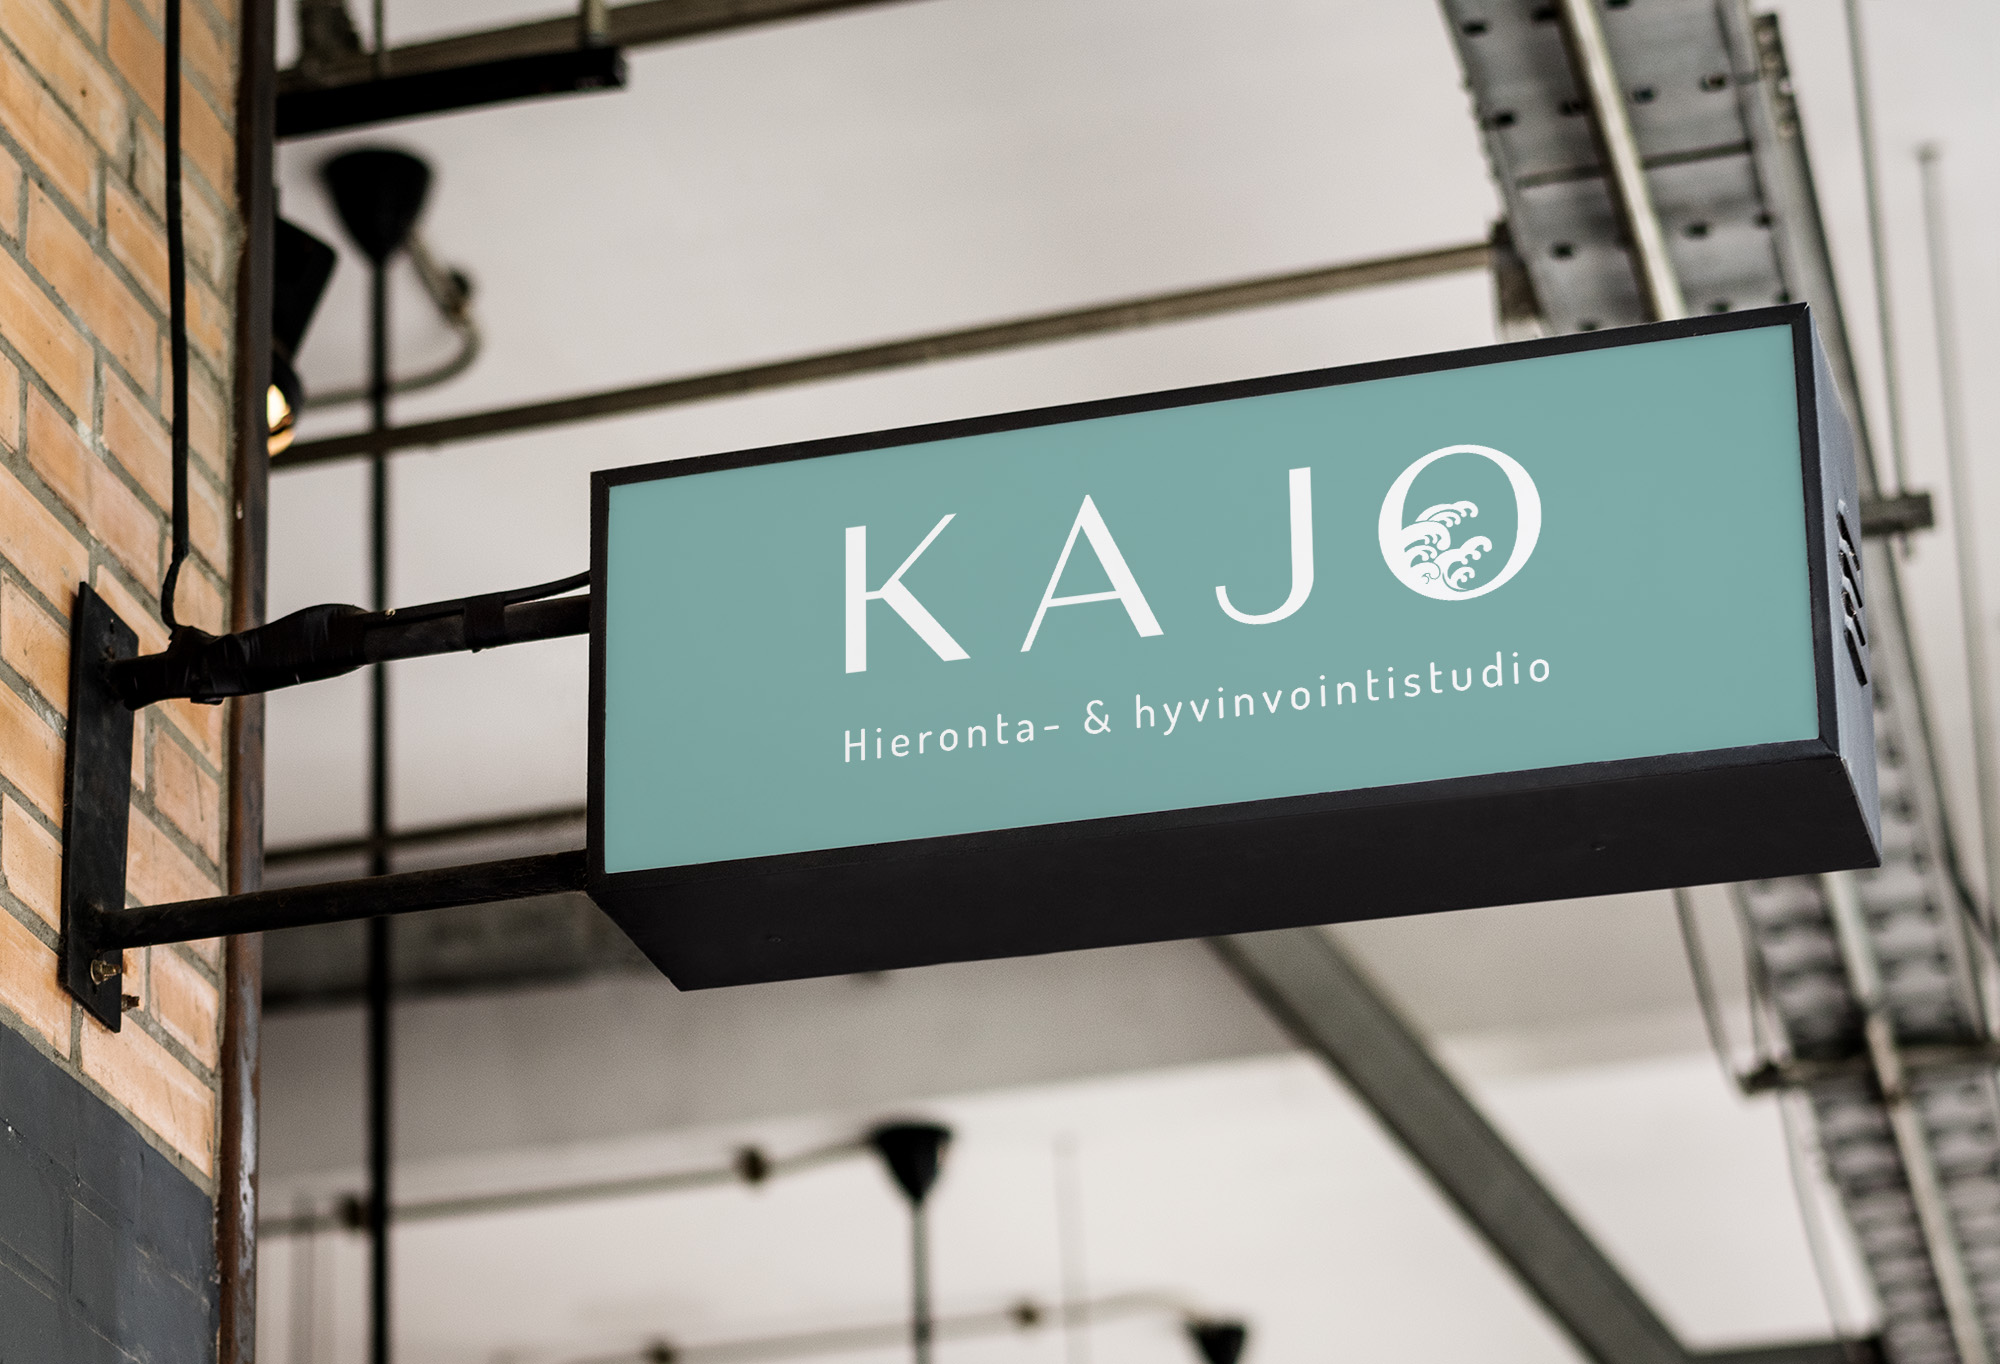 A mockup of the Kajo logo on a mounted signbox. It is printed in white on a seafoam green background.